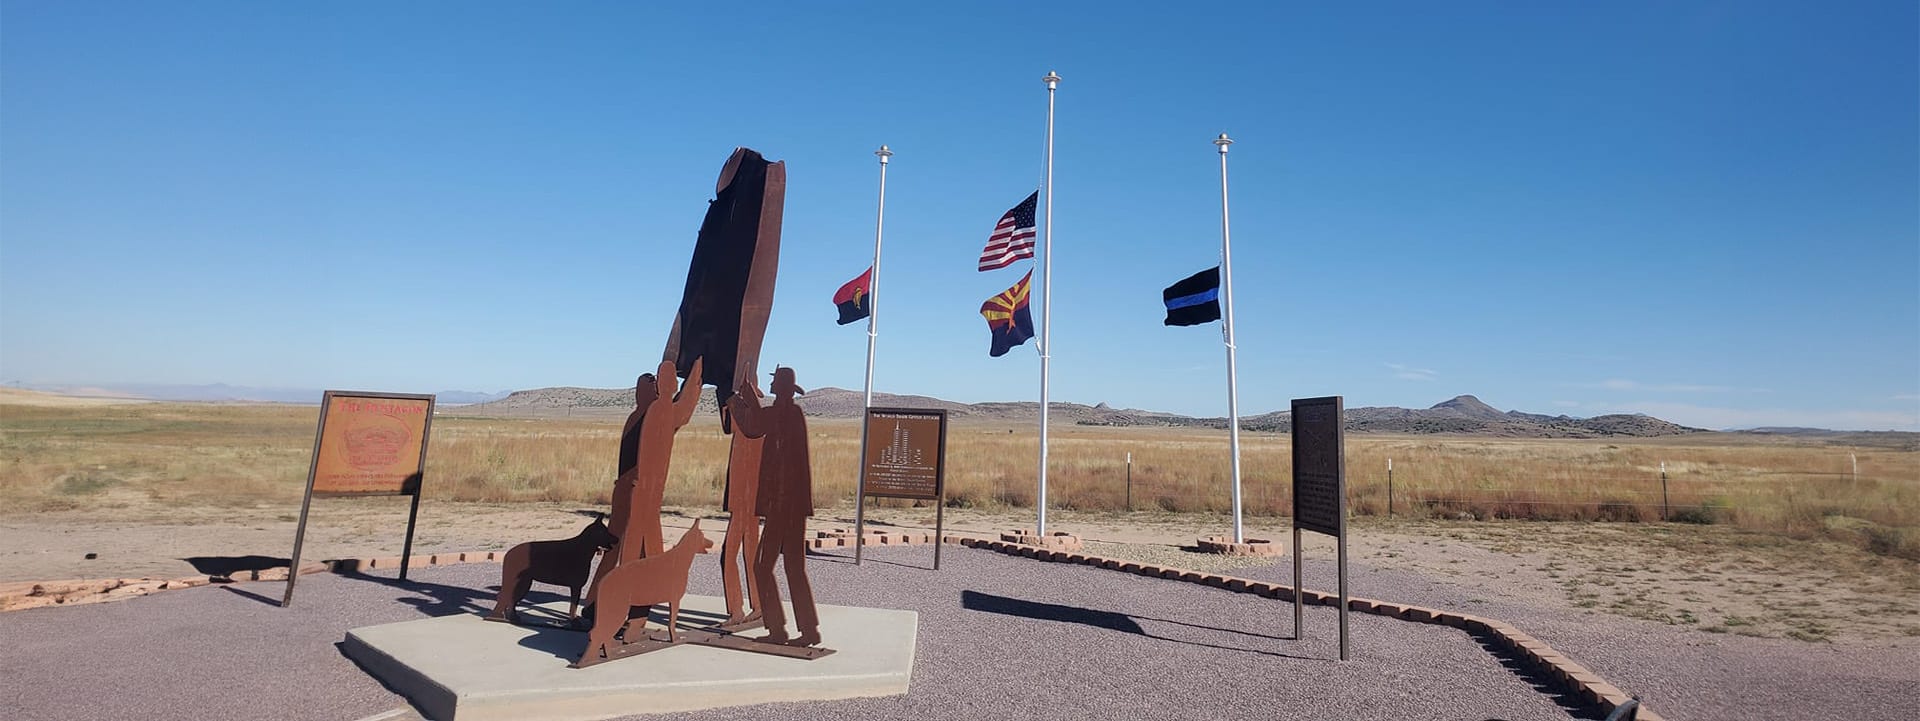 Chino Valley Memorial during the day, being used as a background image